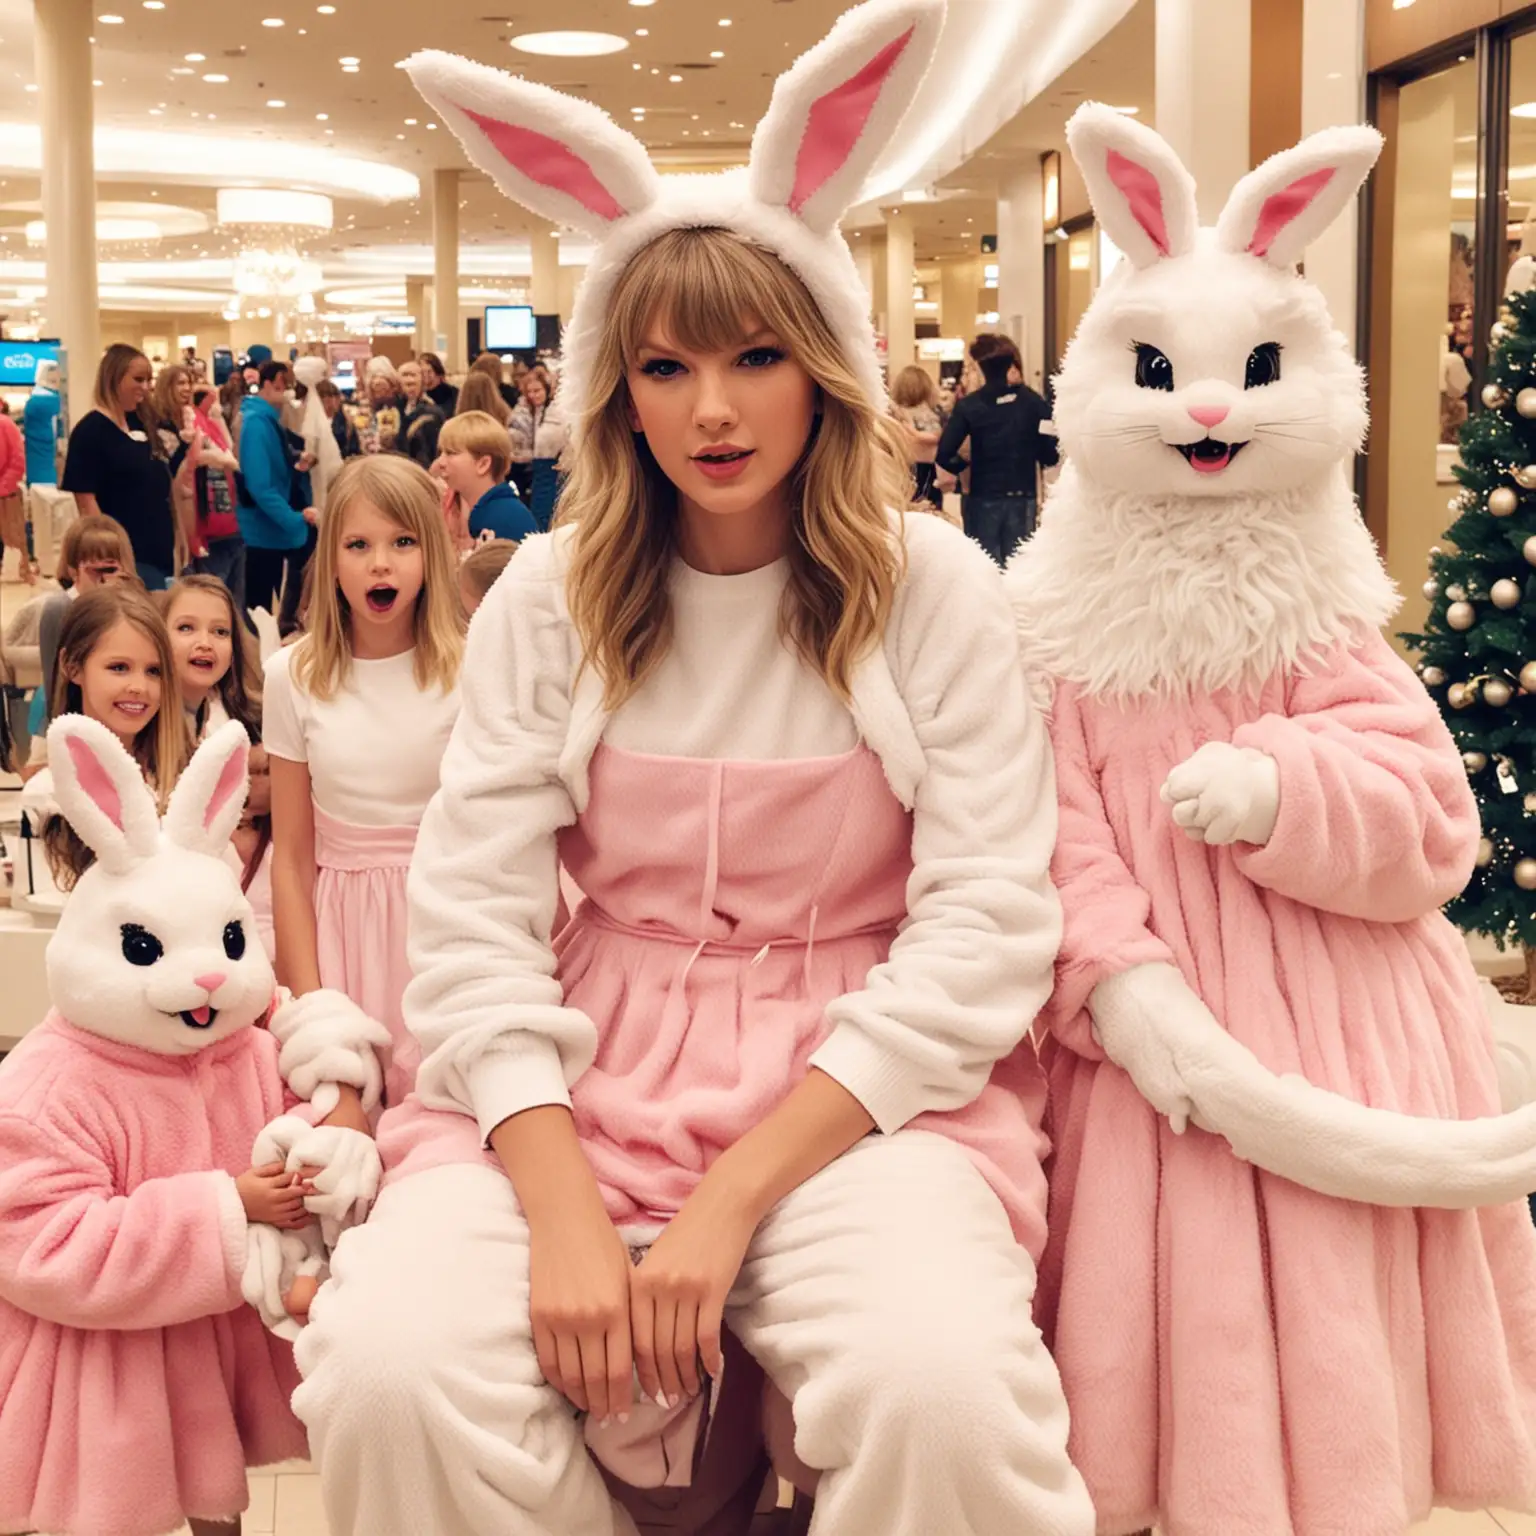 Taylor swift working as a mall Easter bunny taking pictures with kids, full furry gross bunny outfit, awkward, cringe, scary 